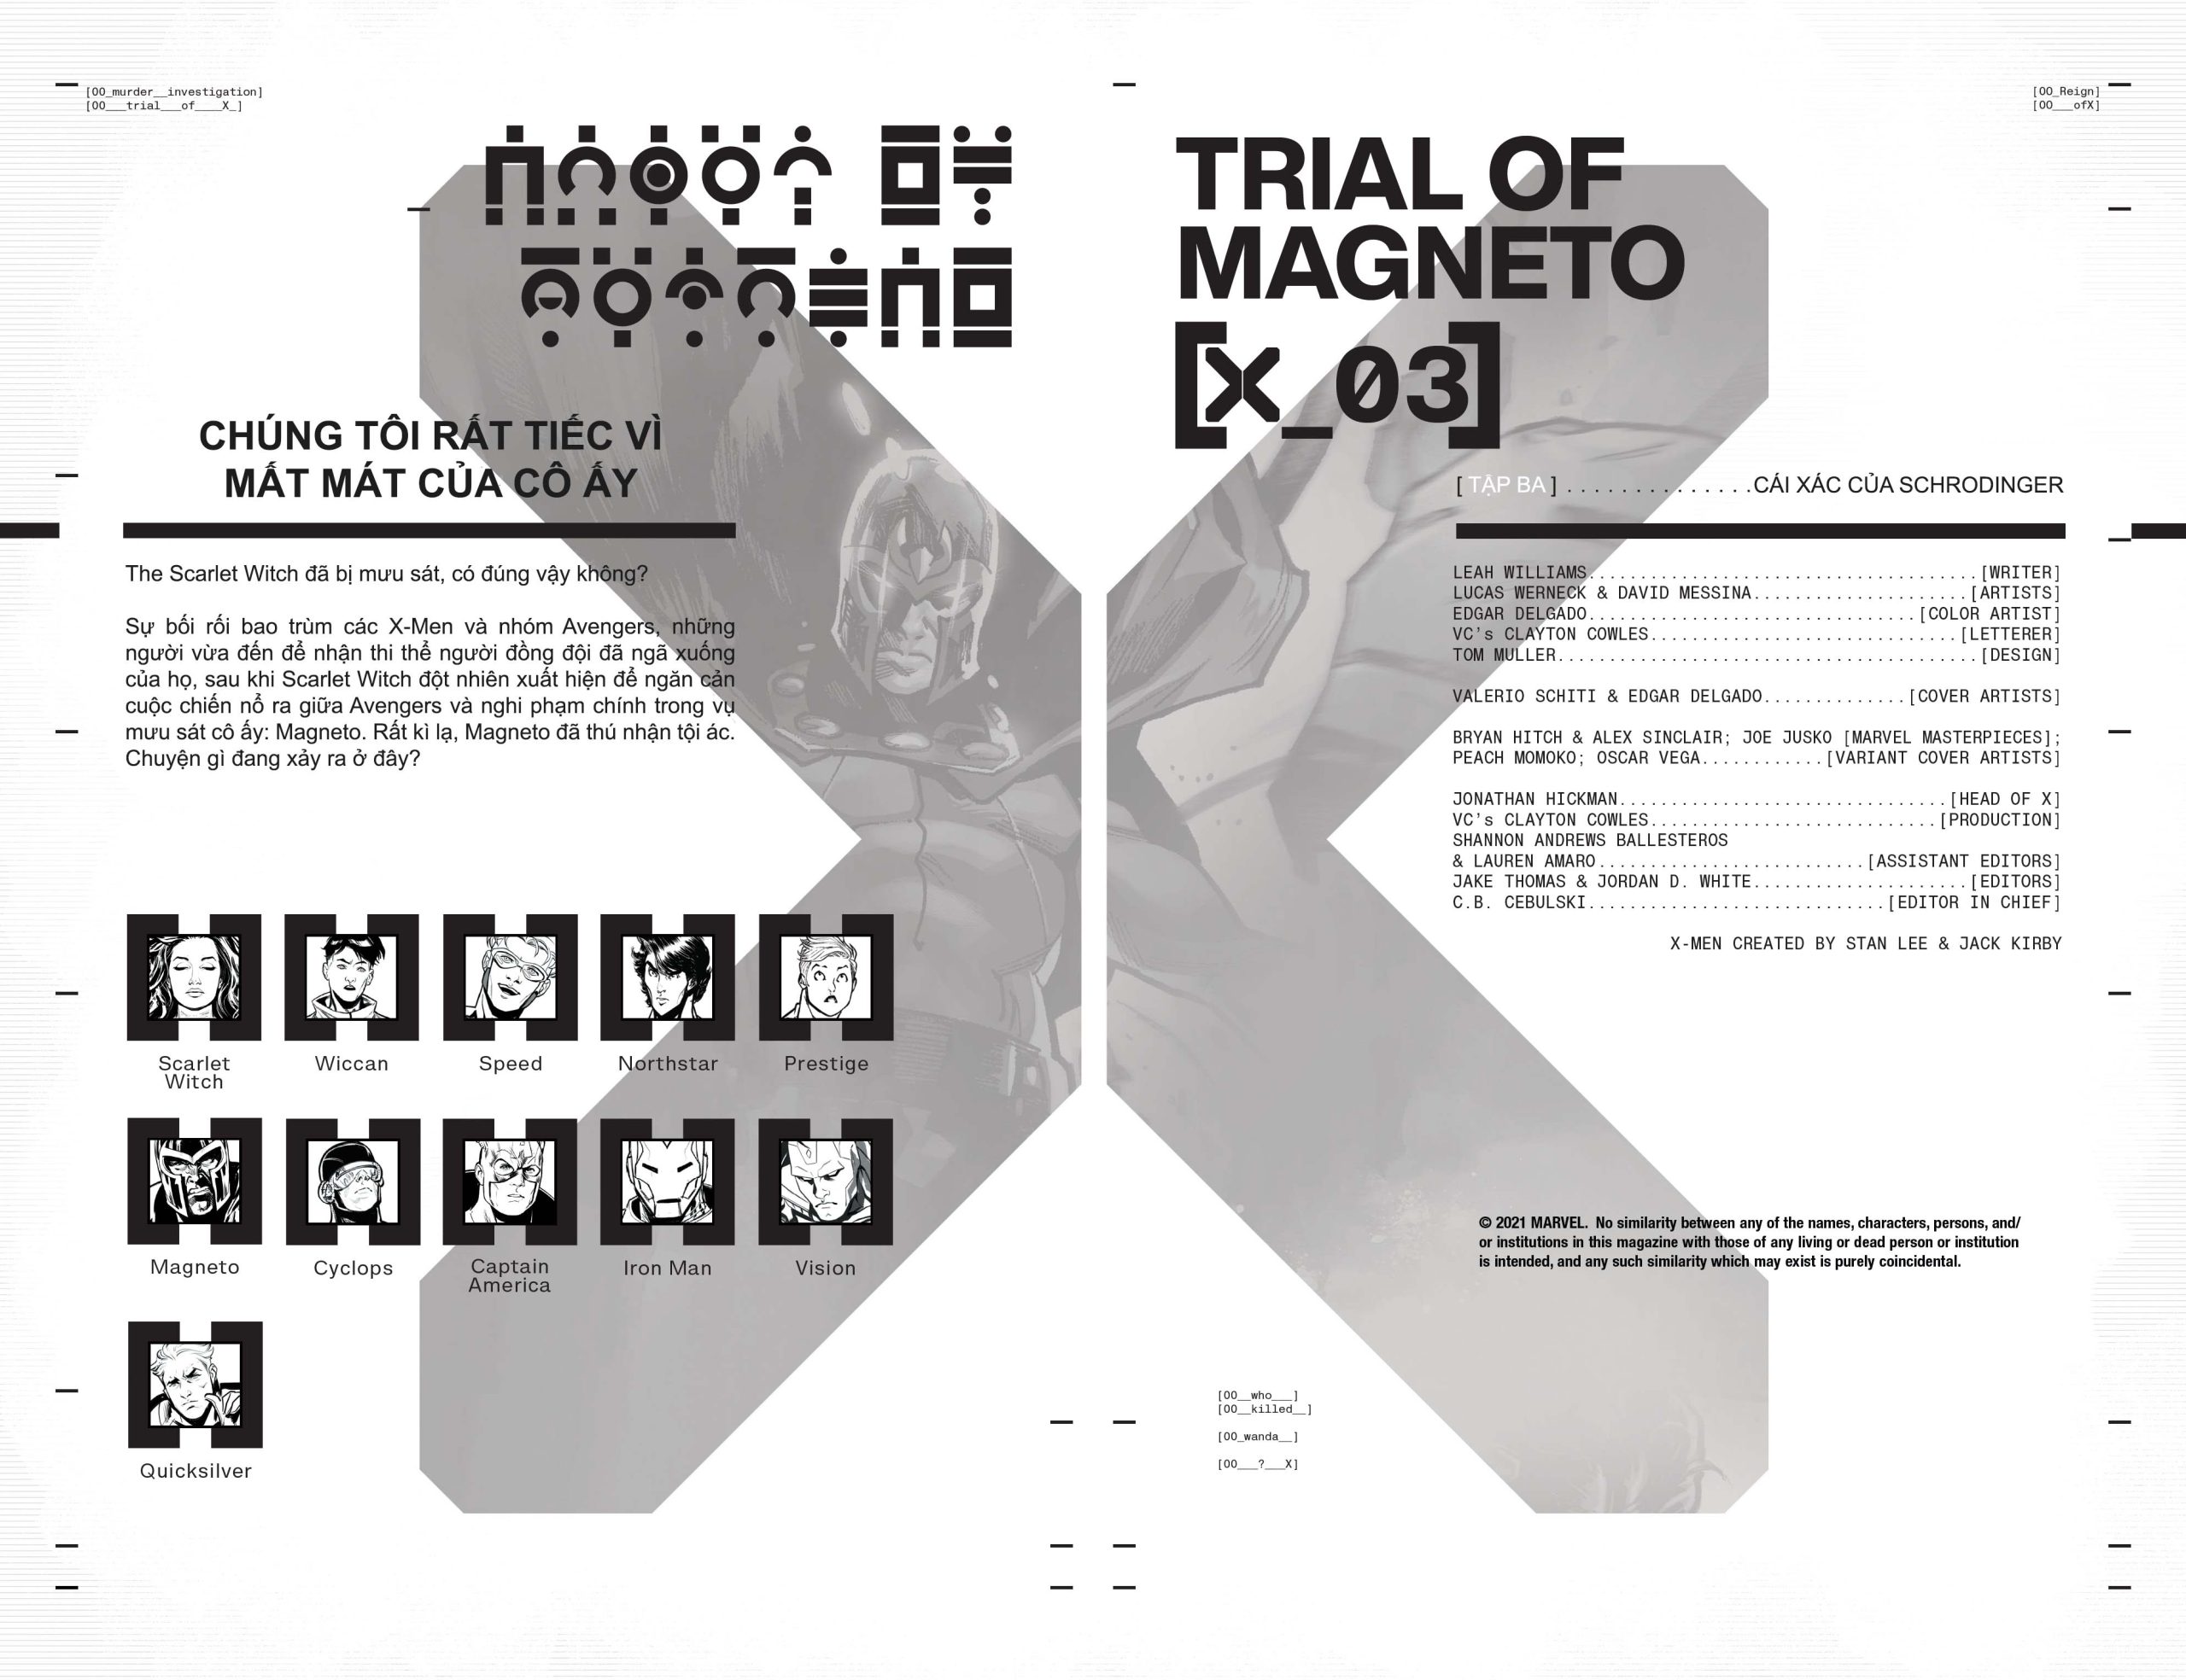 https://langgeek.net/wp-content/webpc-passthru.php?src=https://langgeek.net/wp-content/uploads/2022/03/X-Men-The-Trial-Of-Magneto-2021-03-of-05-006-scaled.jpg&nocache=1